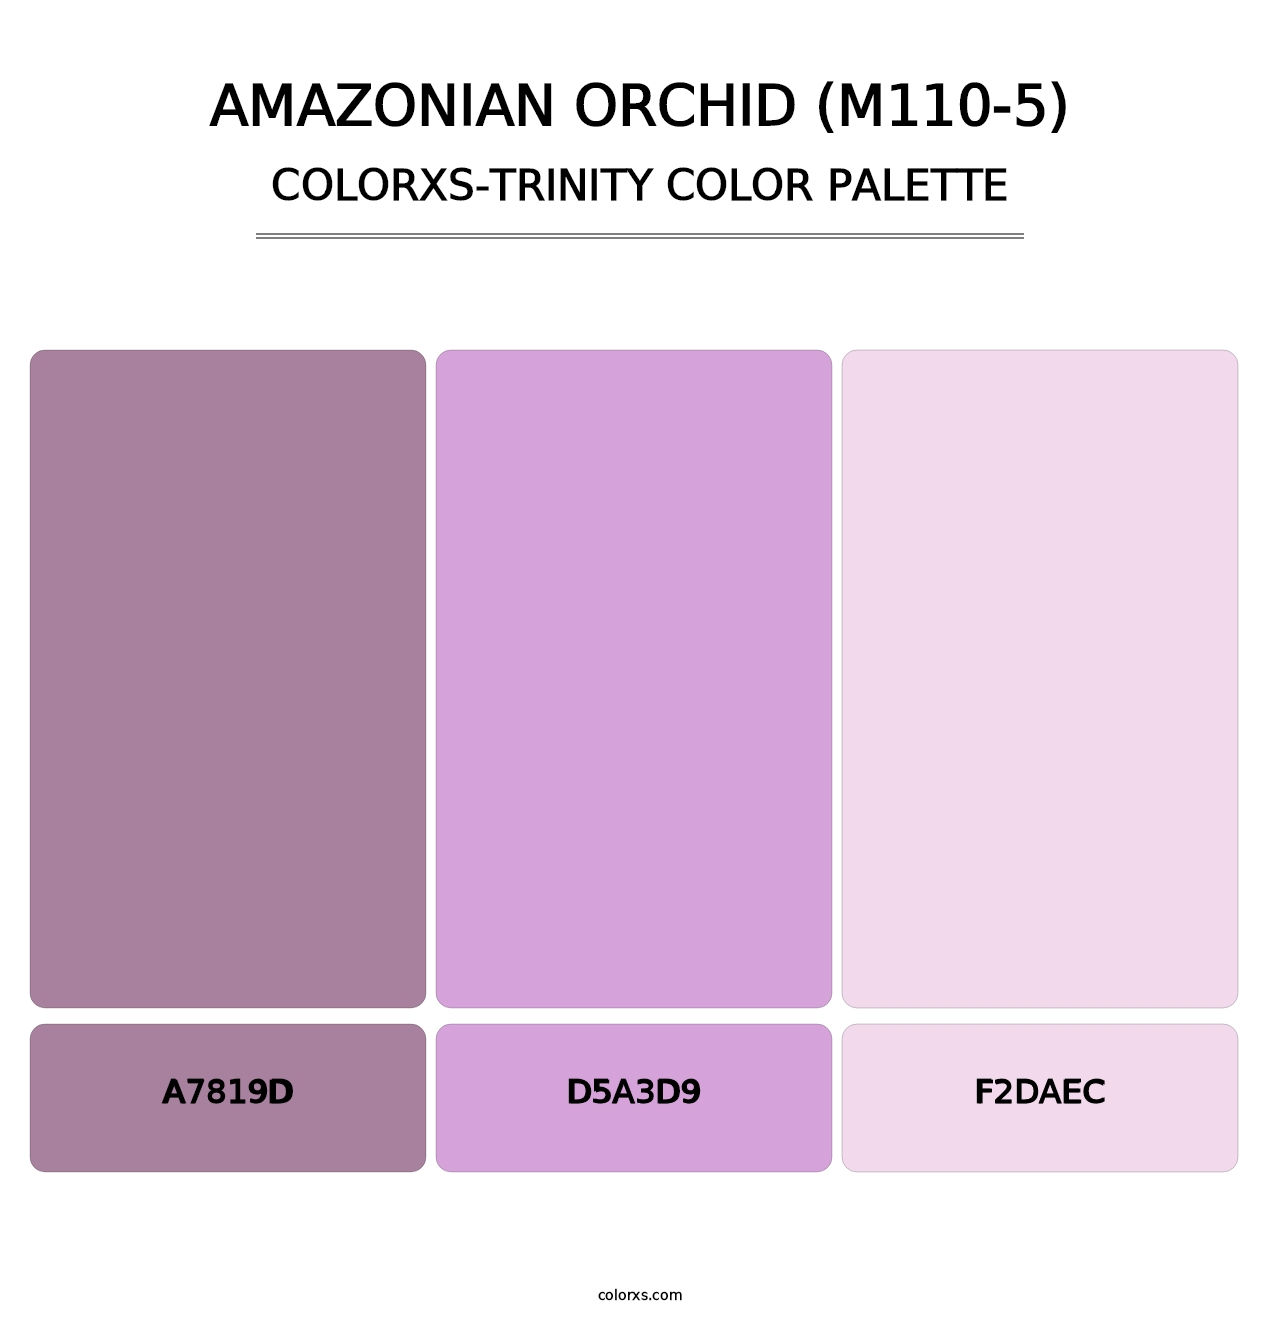 Amazonian Orchid (M110-5) - Colorxs Trinity Palette